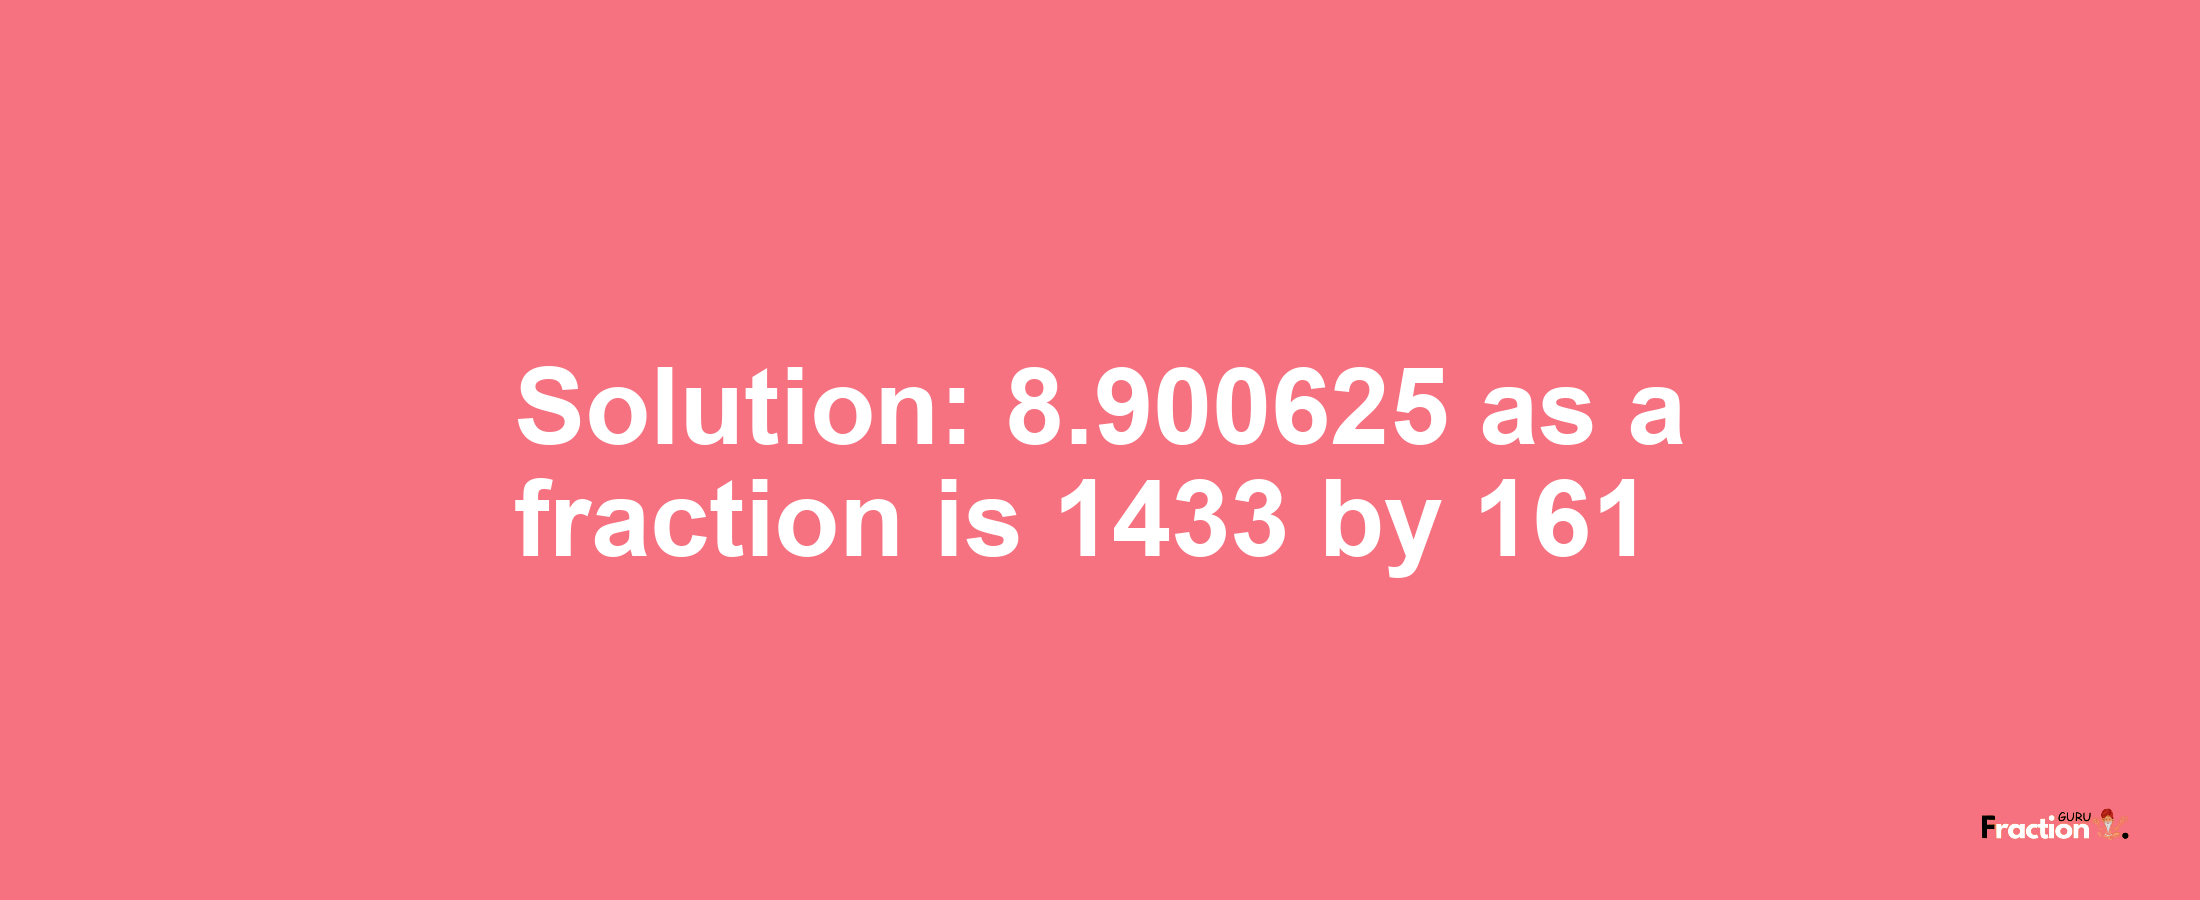 Solution:8.900625 as a fraction is 1433/161